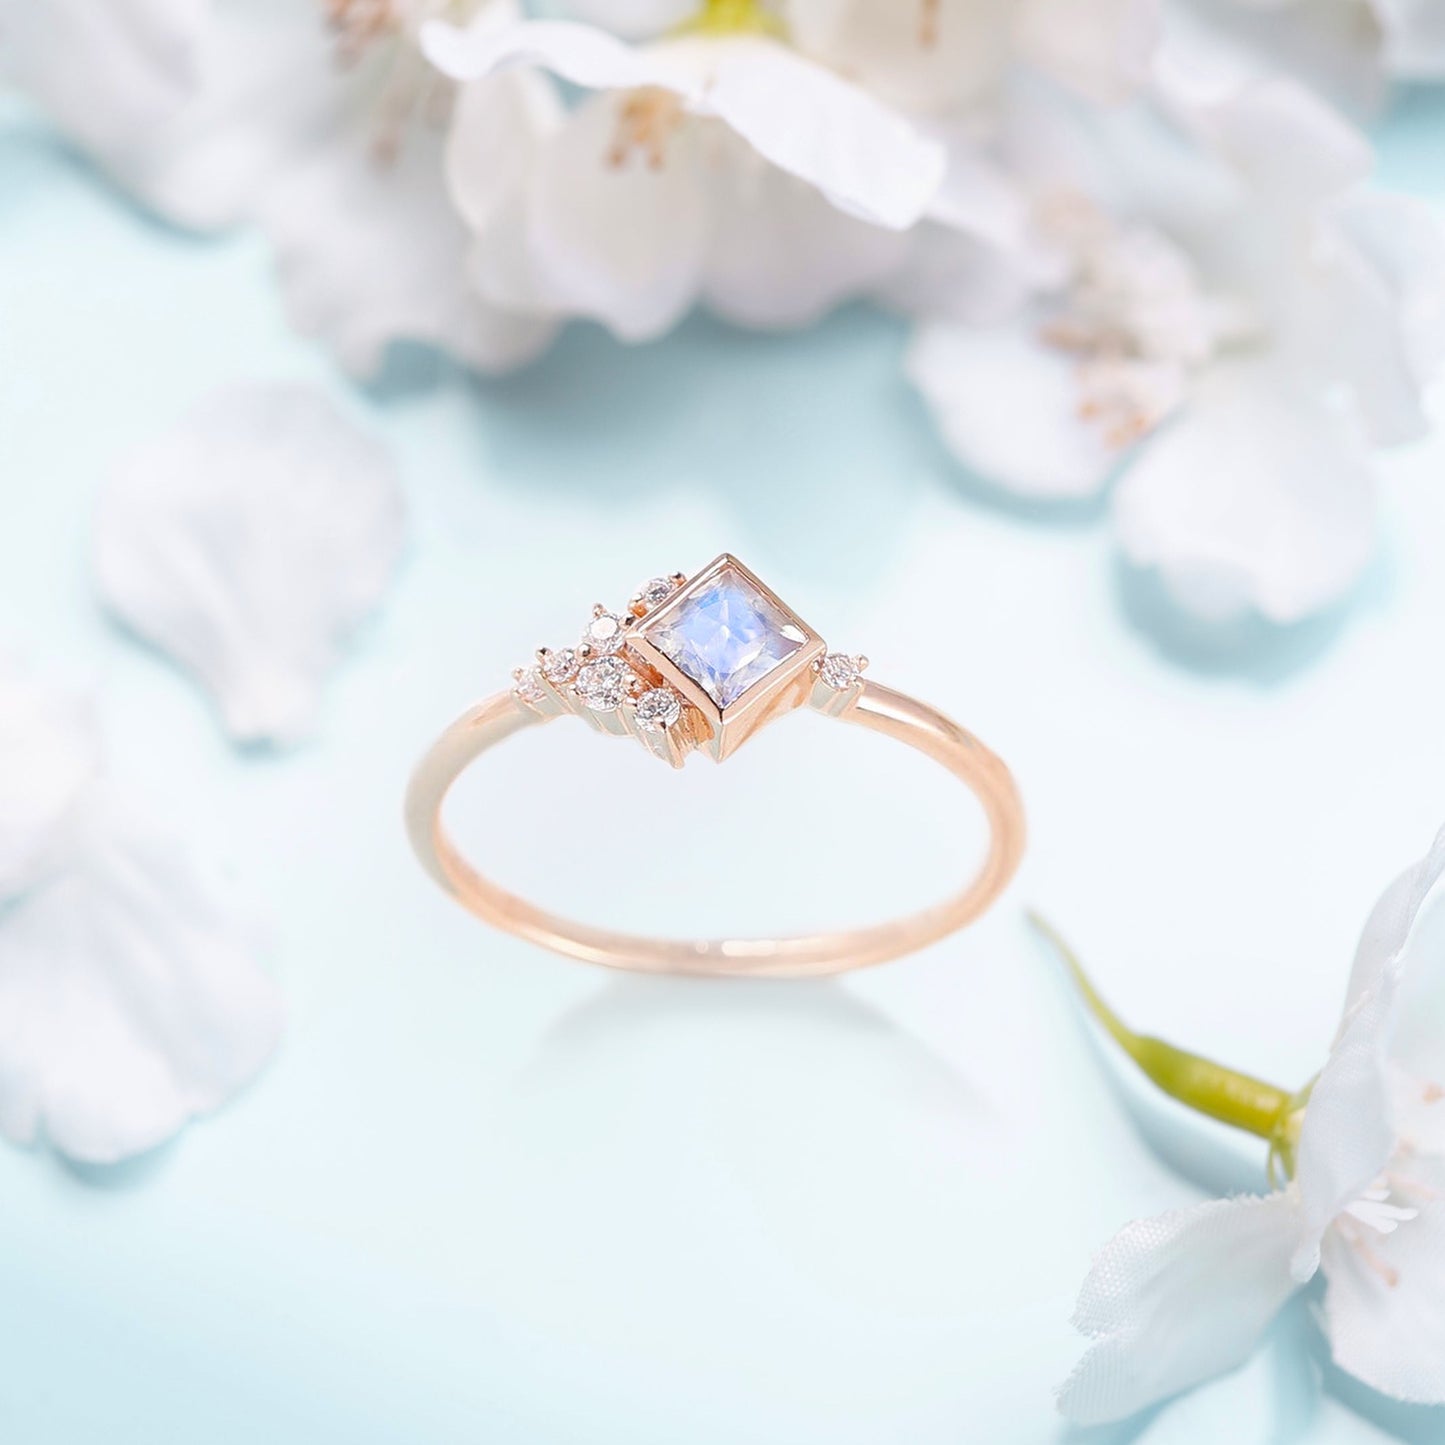 Engagement ring with a Moonstone and white Zircon on a table with flowers